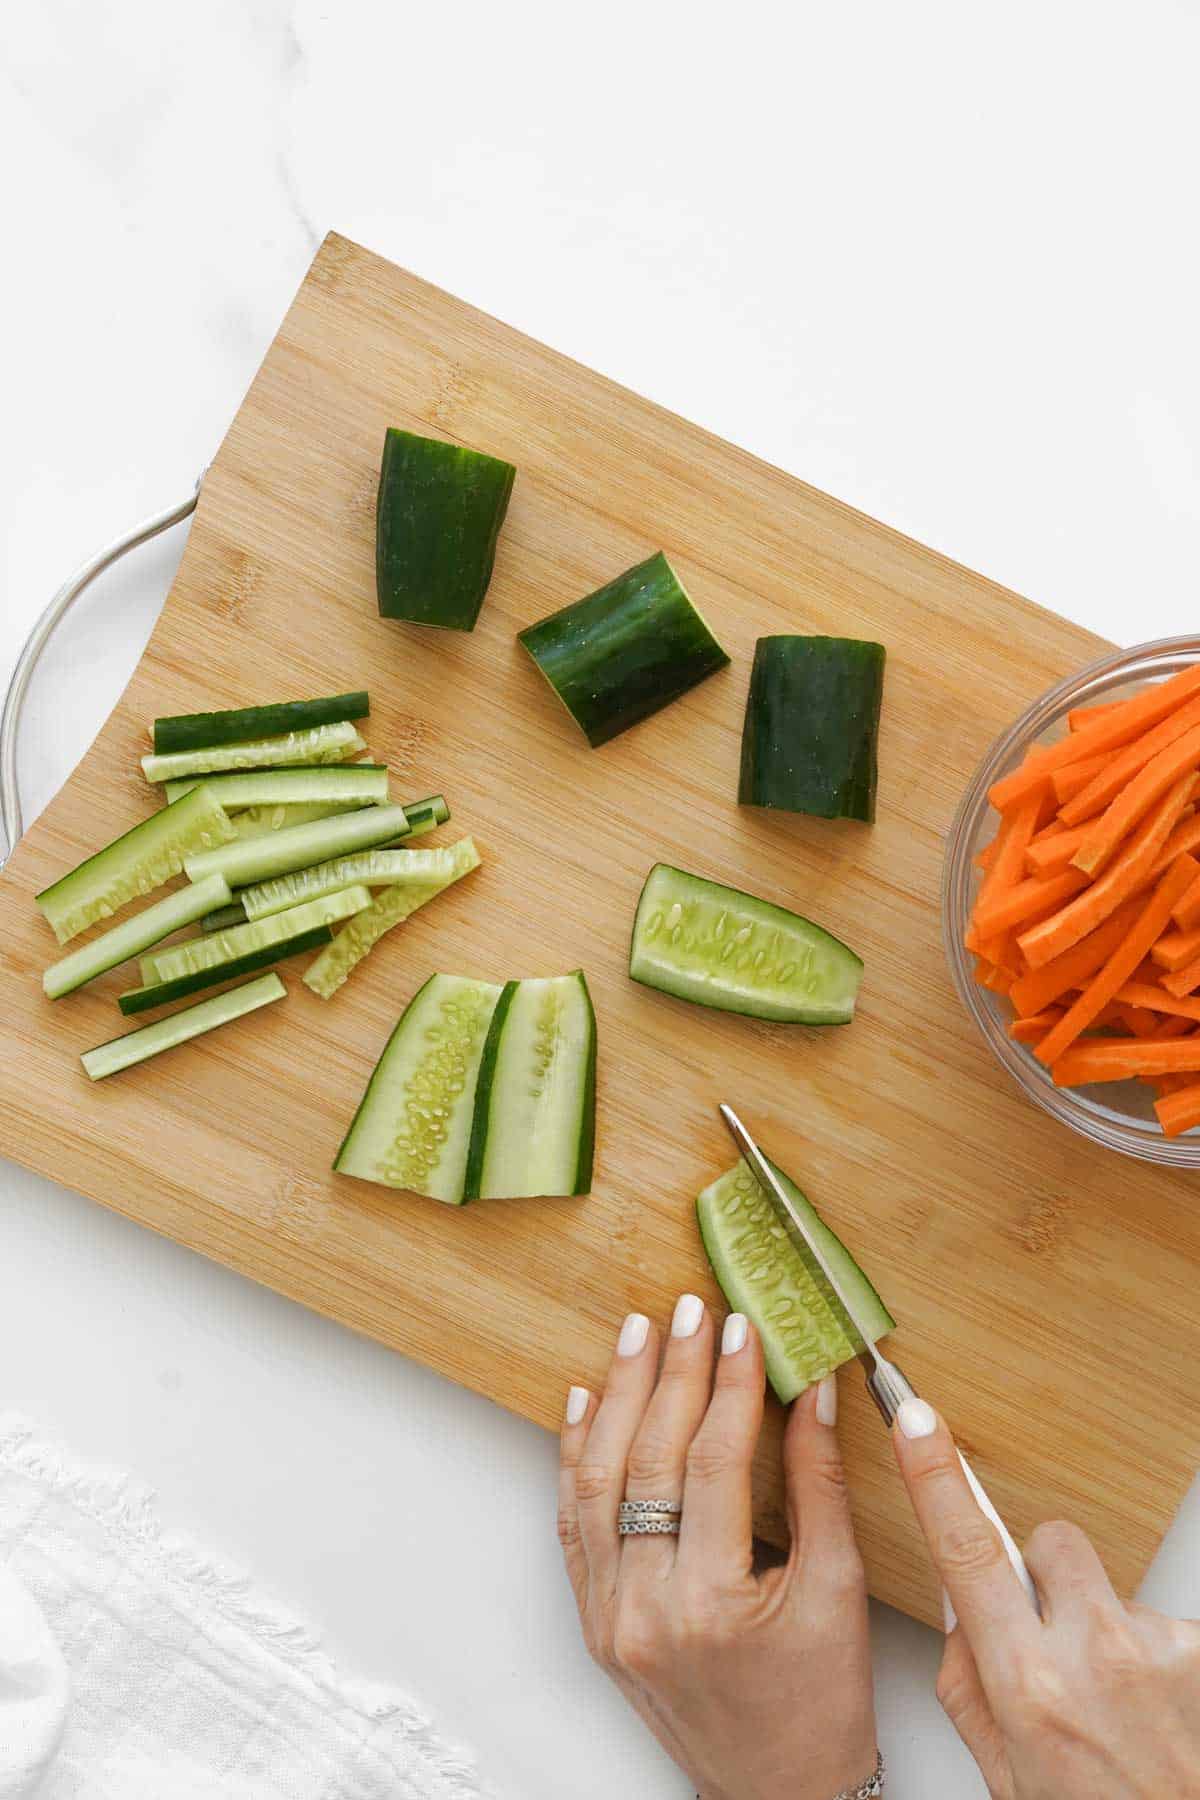 A person slicing cucumber on a wooden cutting board, next to a bowl of carrot sticks.